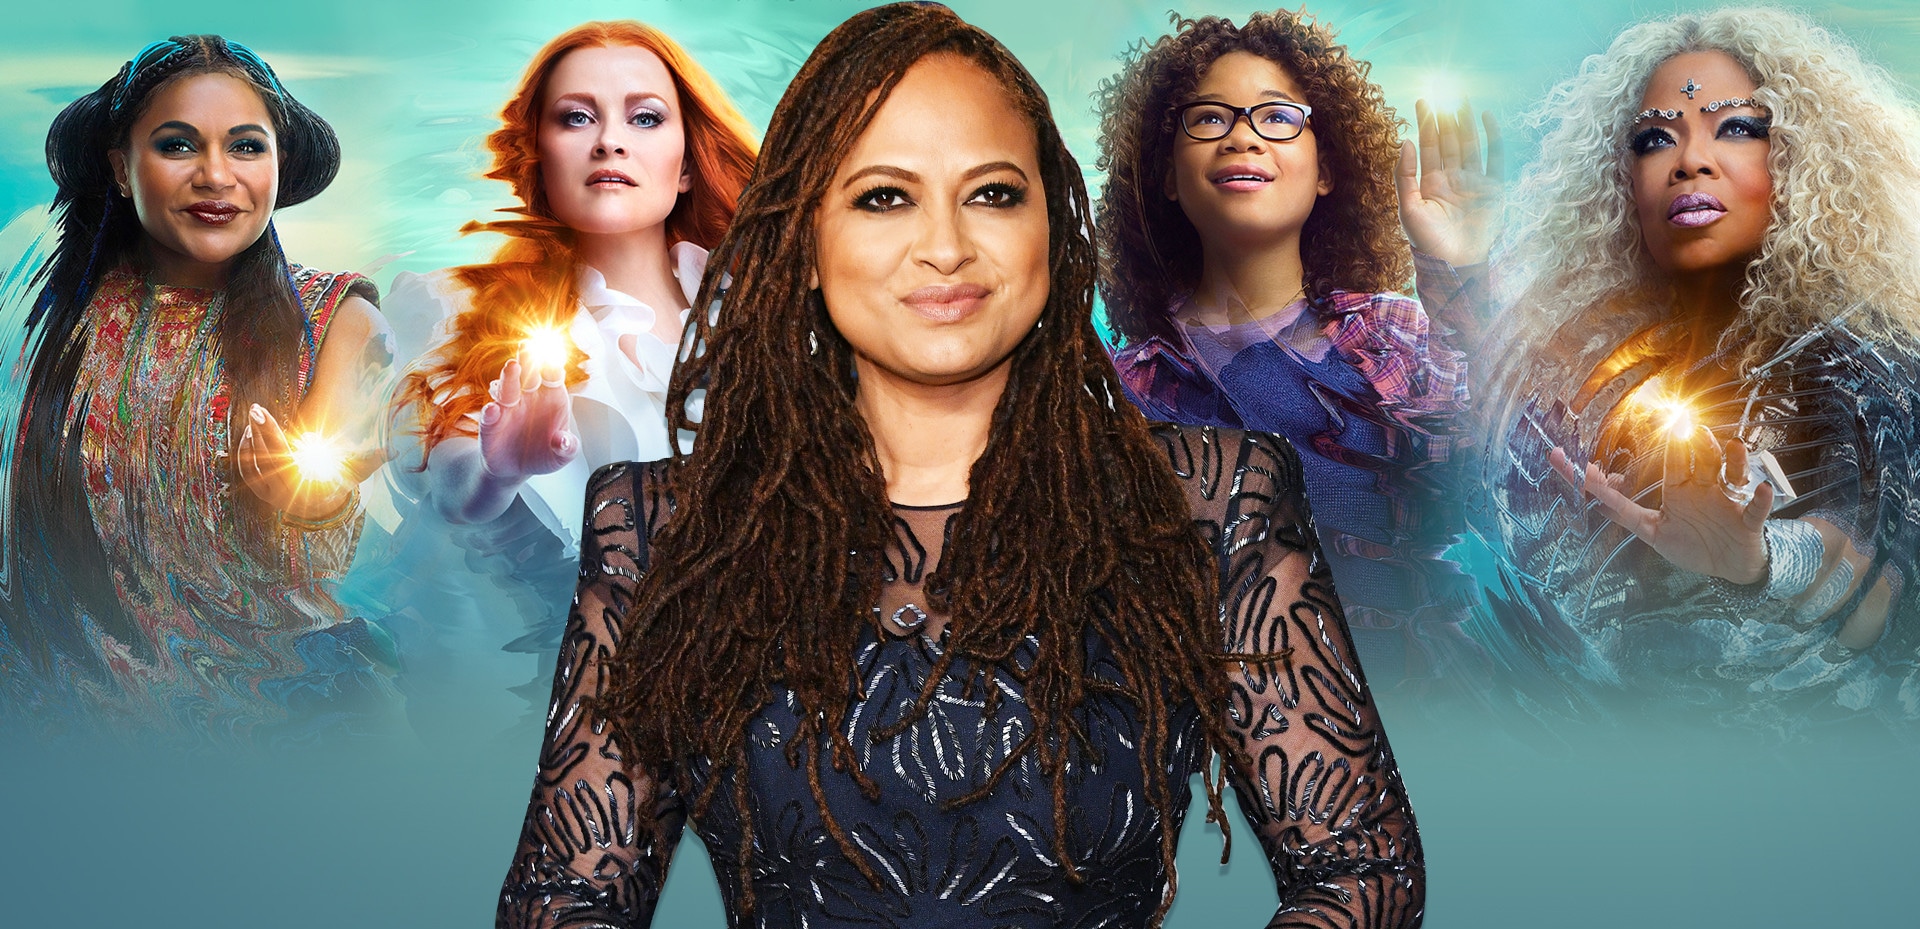 A Wrinkle in Time, Ava Duvernay